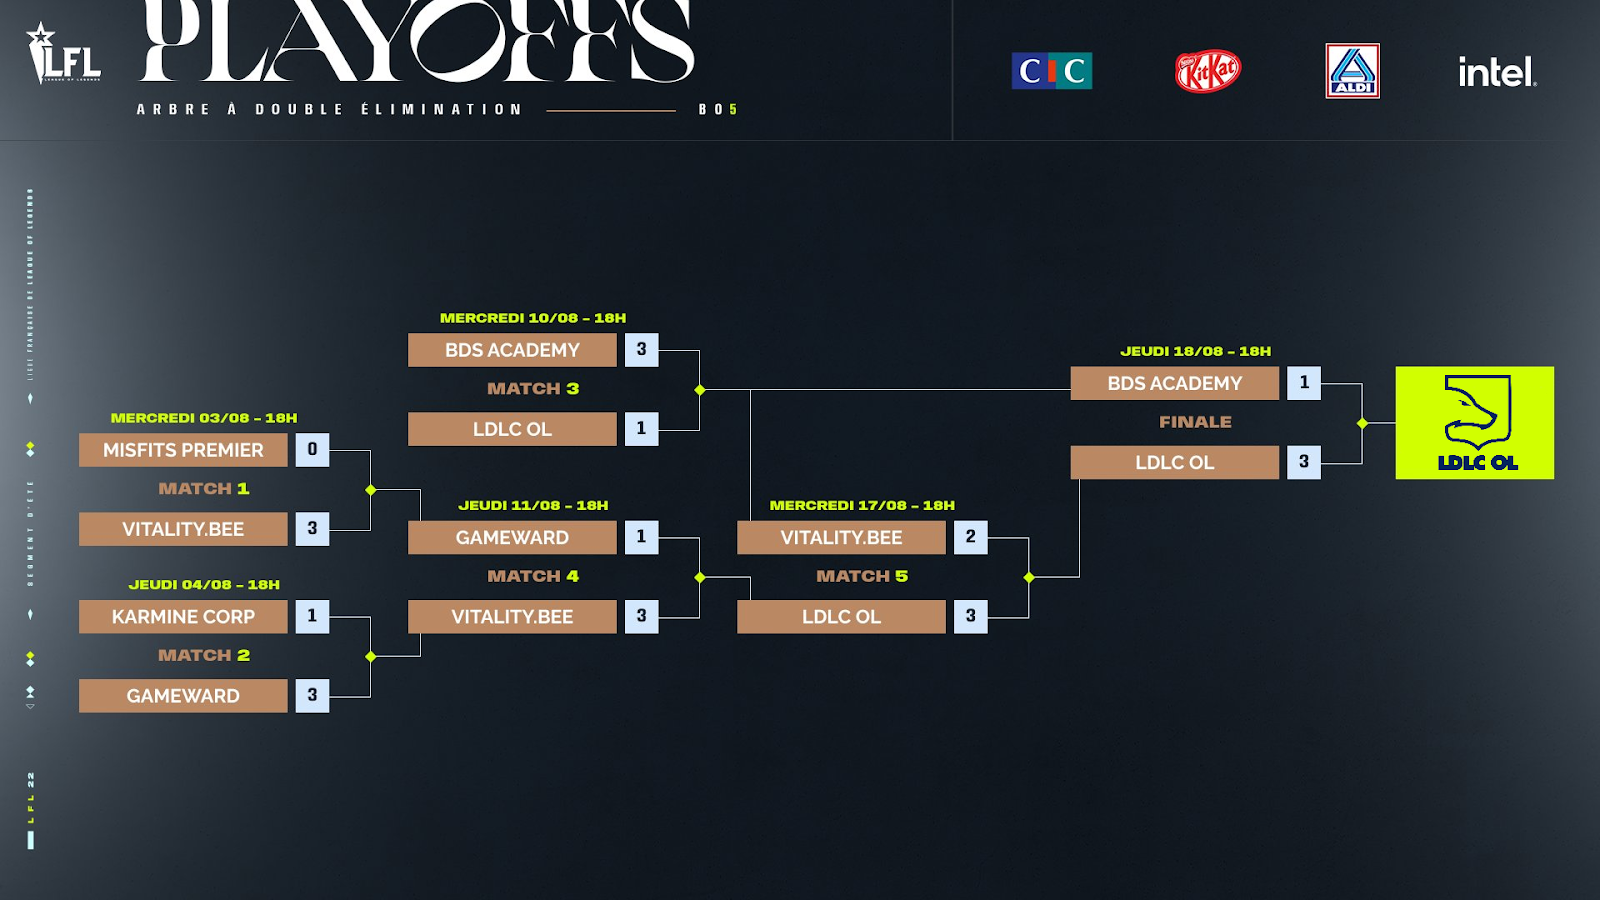 The bracket for the LFL Playoffs